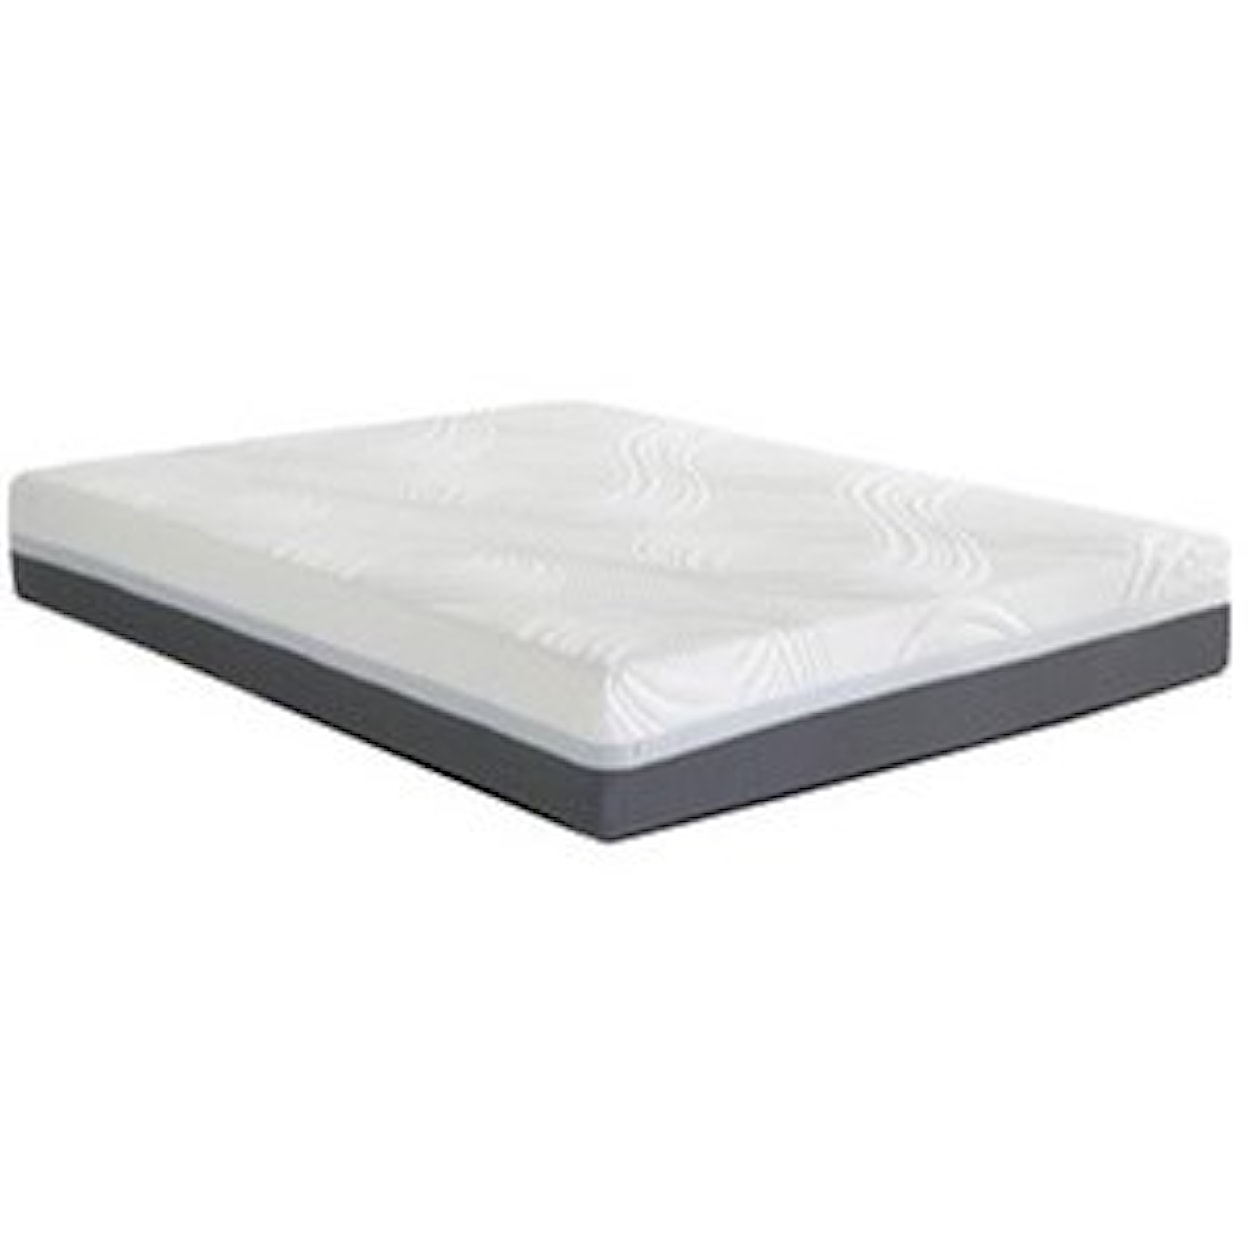 Spring Air Cool Reflections Phase 2 Twin XL Luxury Firm Mattress